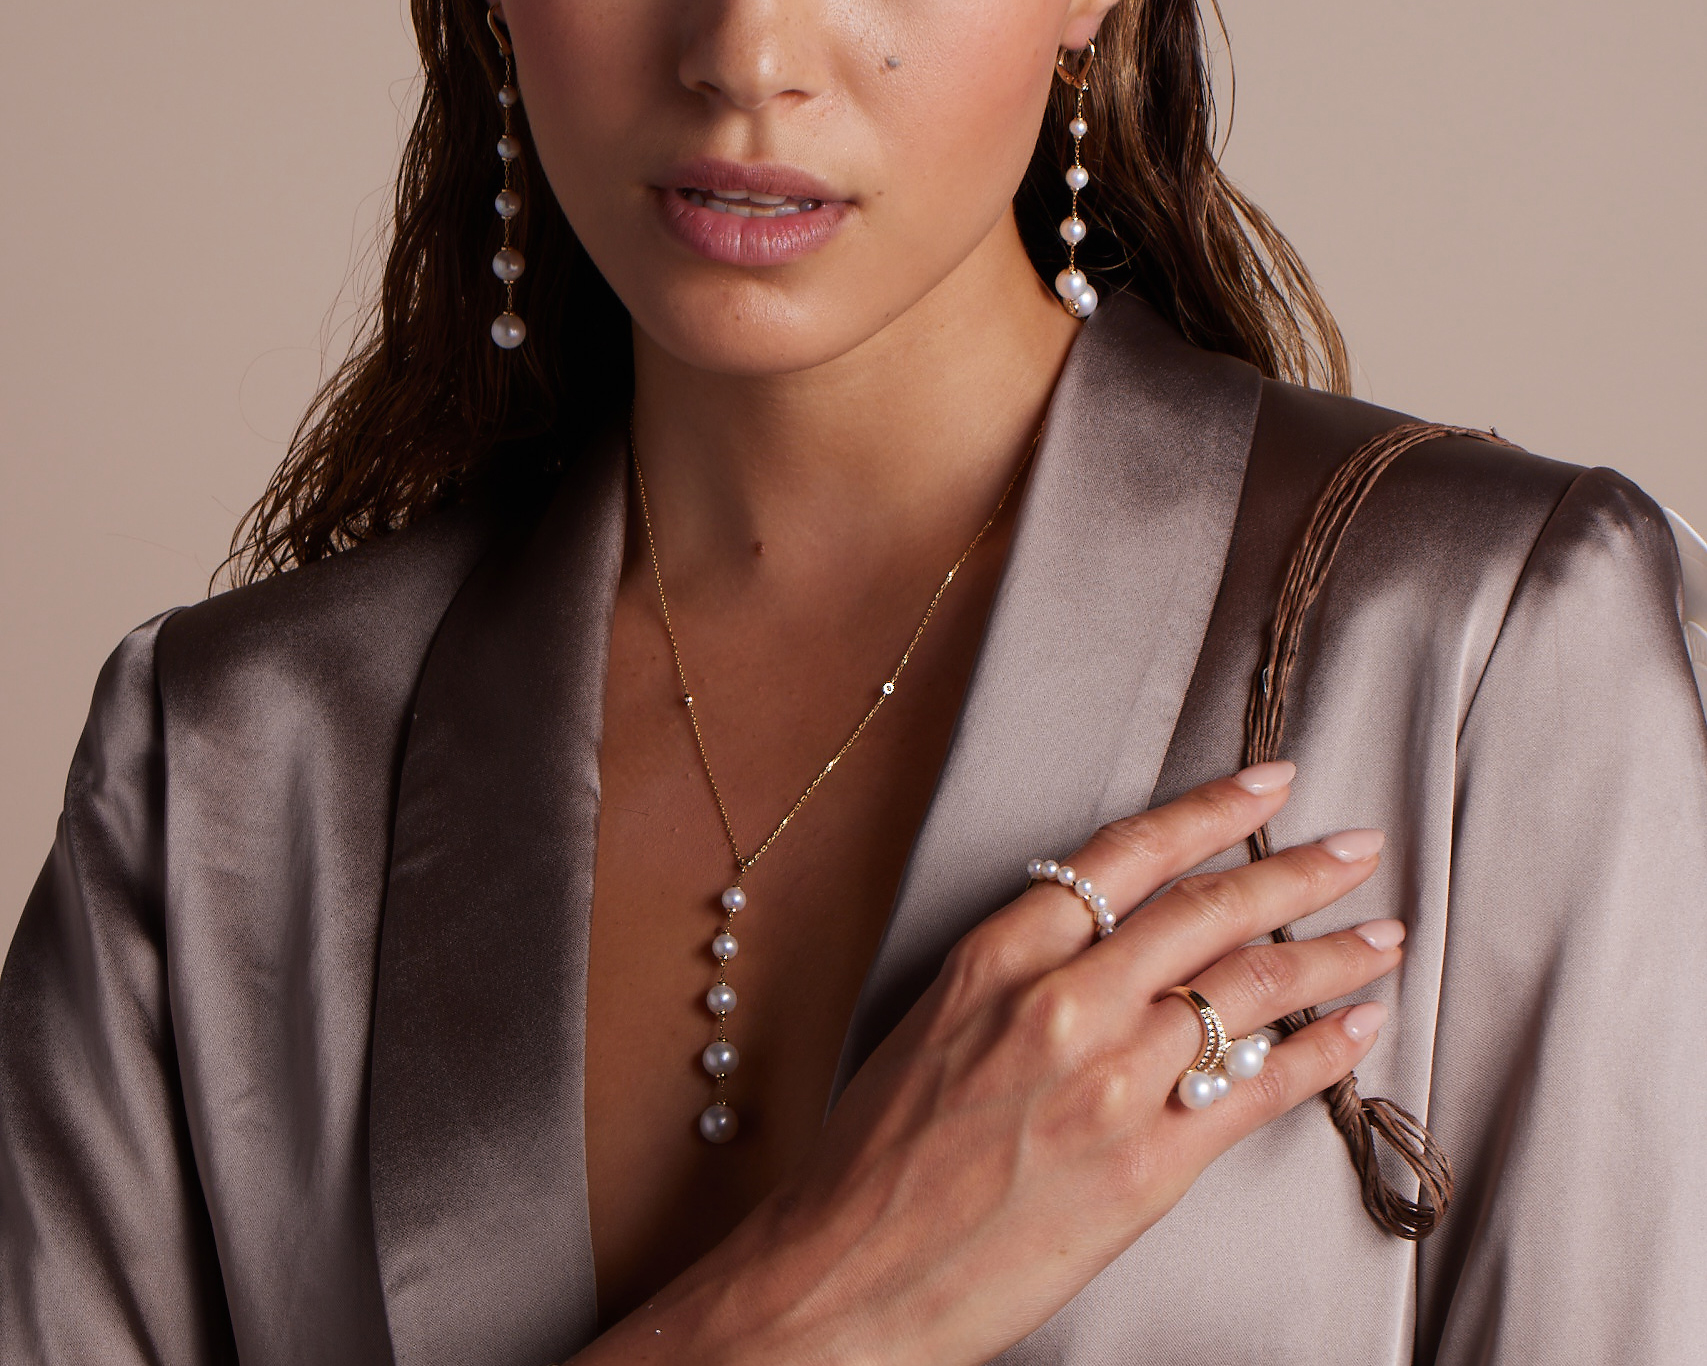 Check Out Le Vian's Enormous New High Jewelry Collection - The